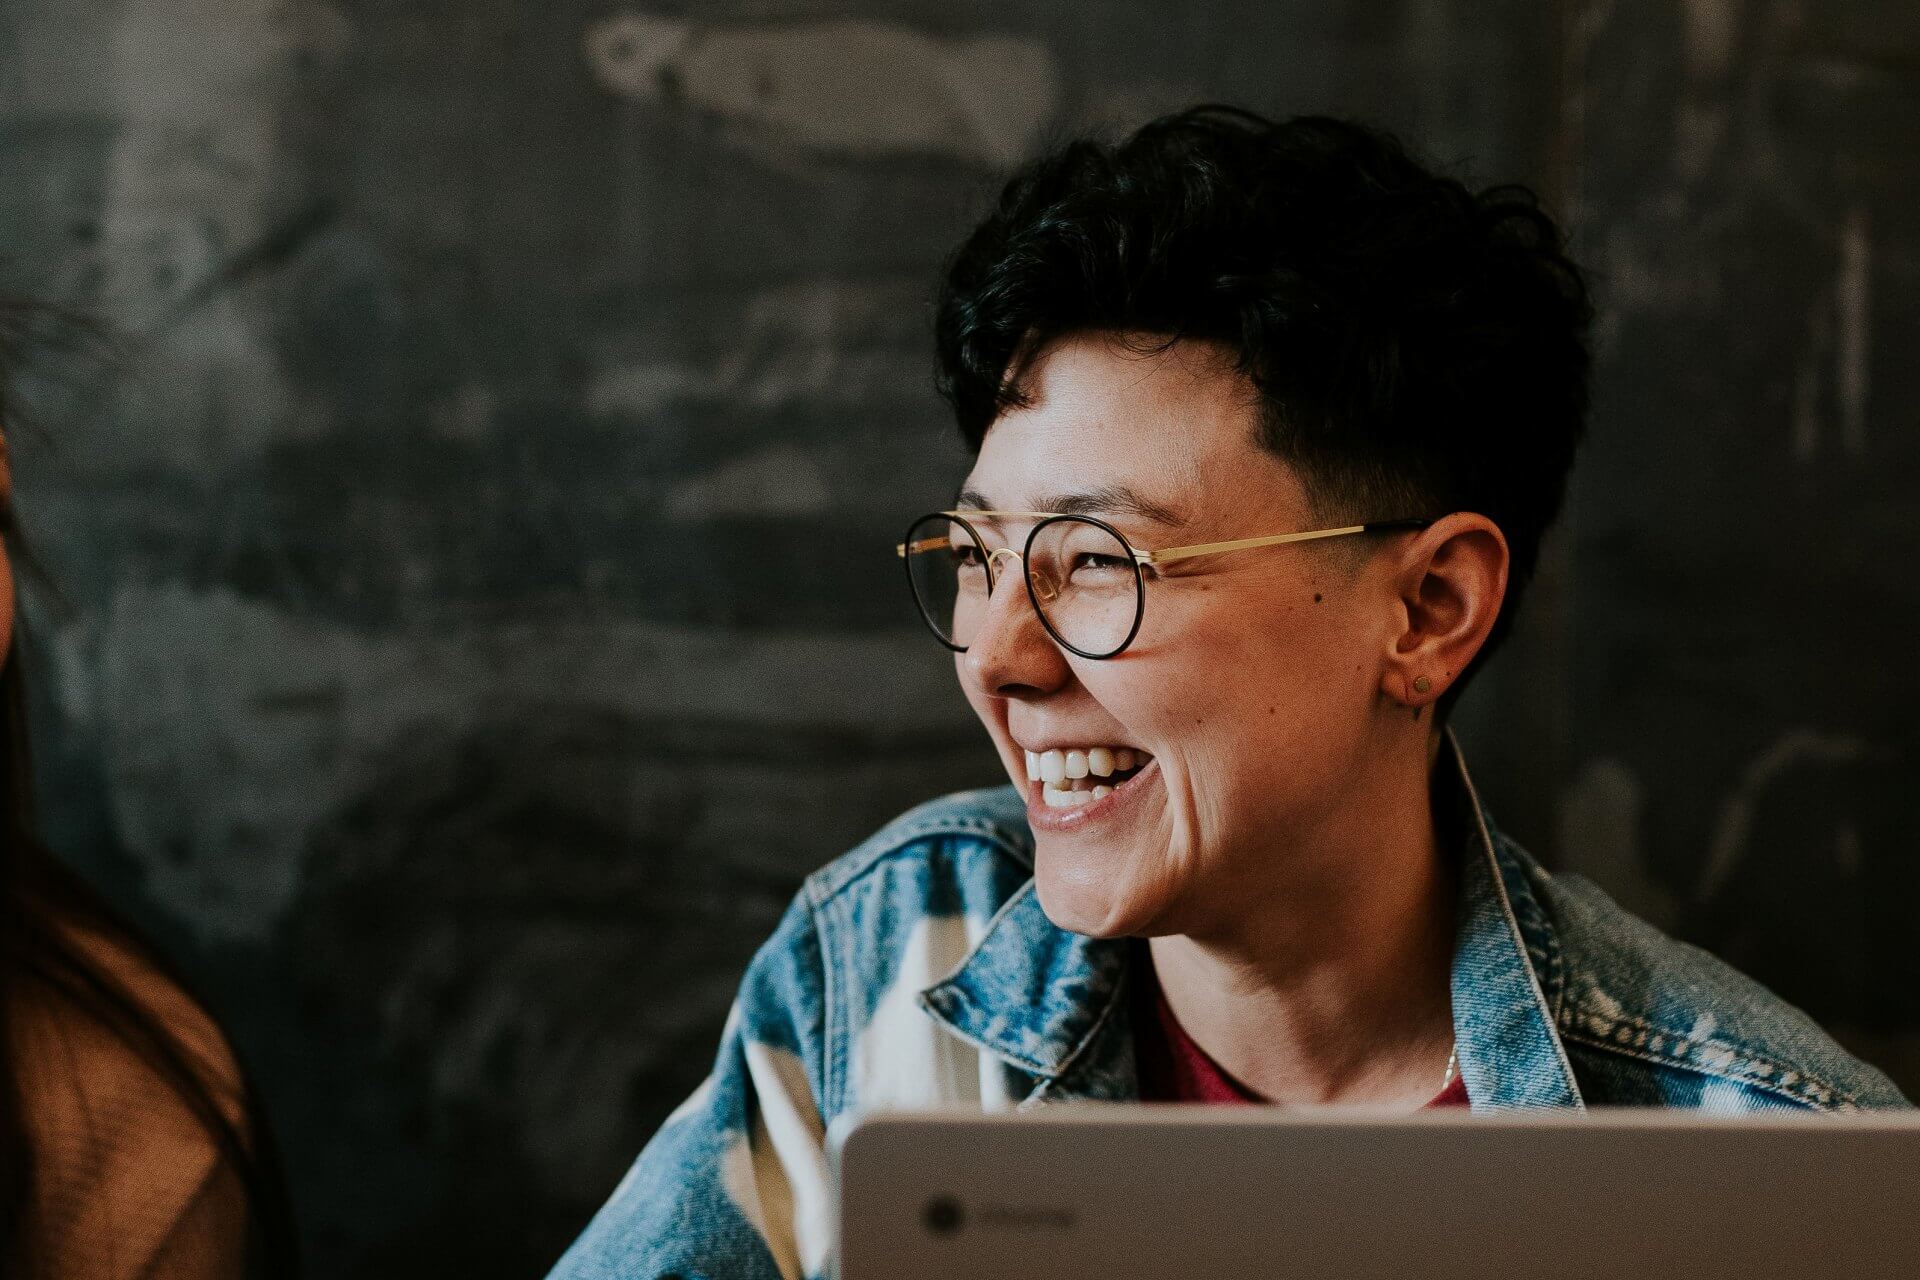 A woman in a denim jacket and glasses sitting at her laptop smiles broadly (Photo by Brooke Cagle on Unsplash)